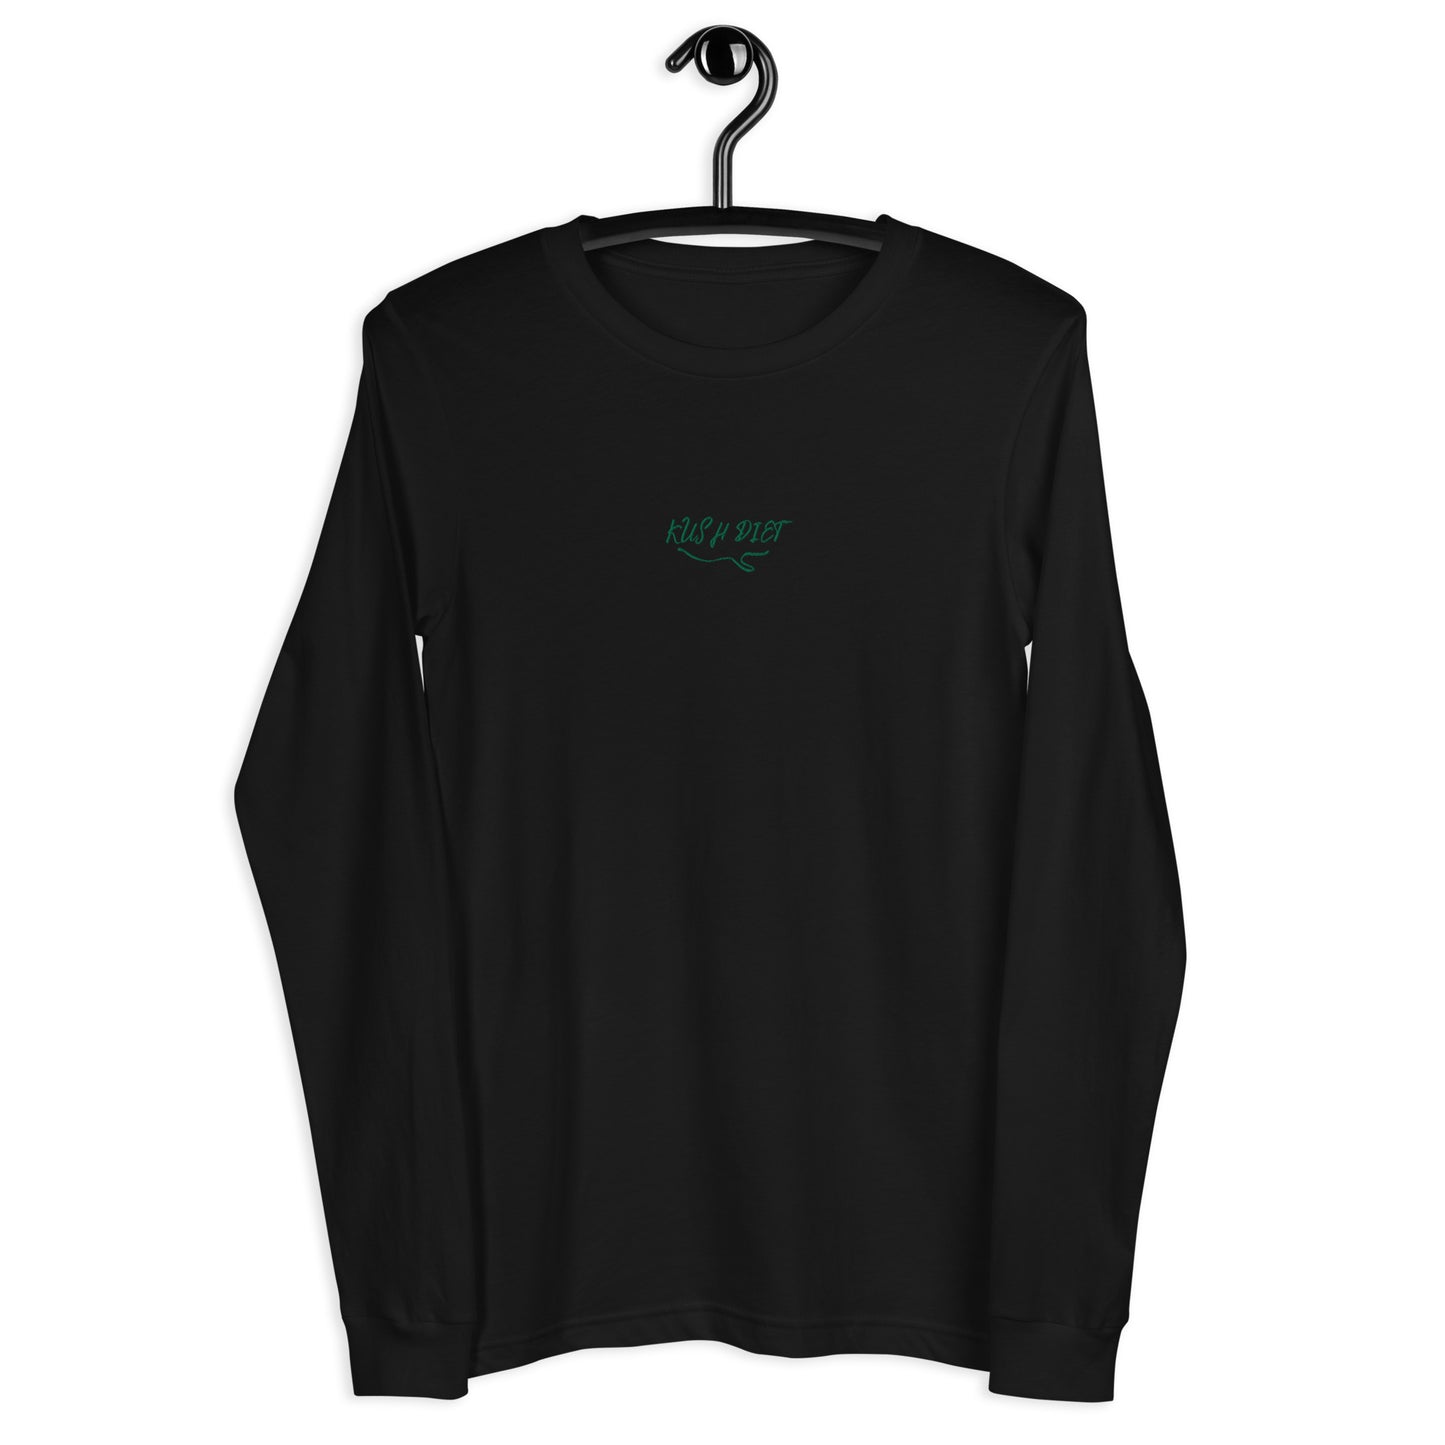 Kush Diet - Long Sleeve (Embroidered)